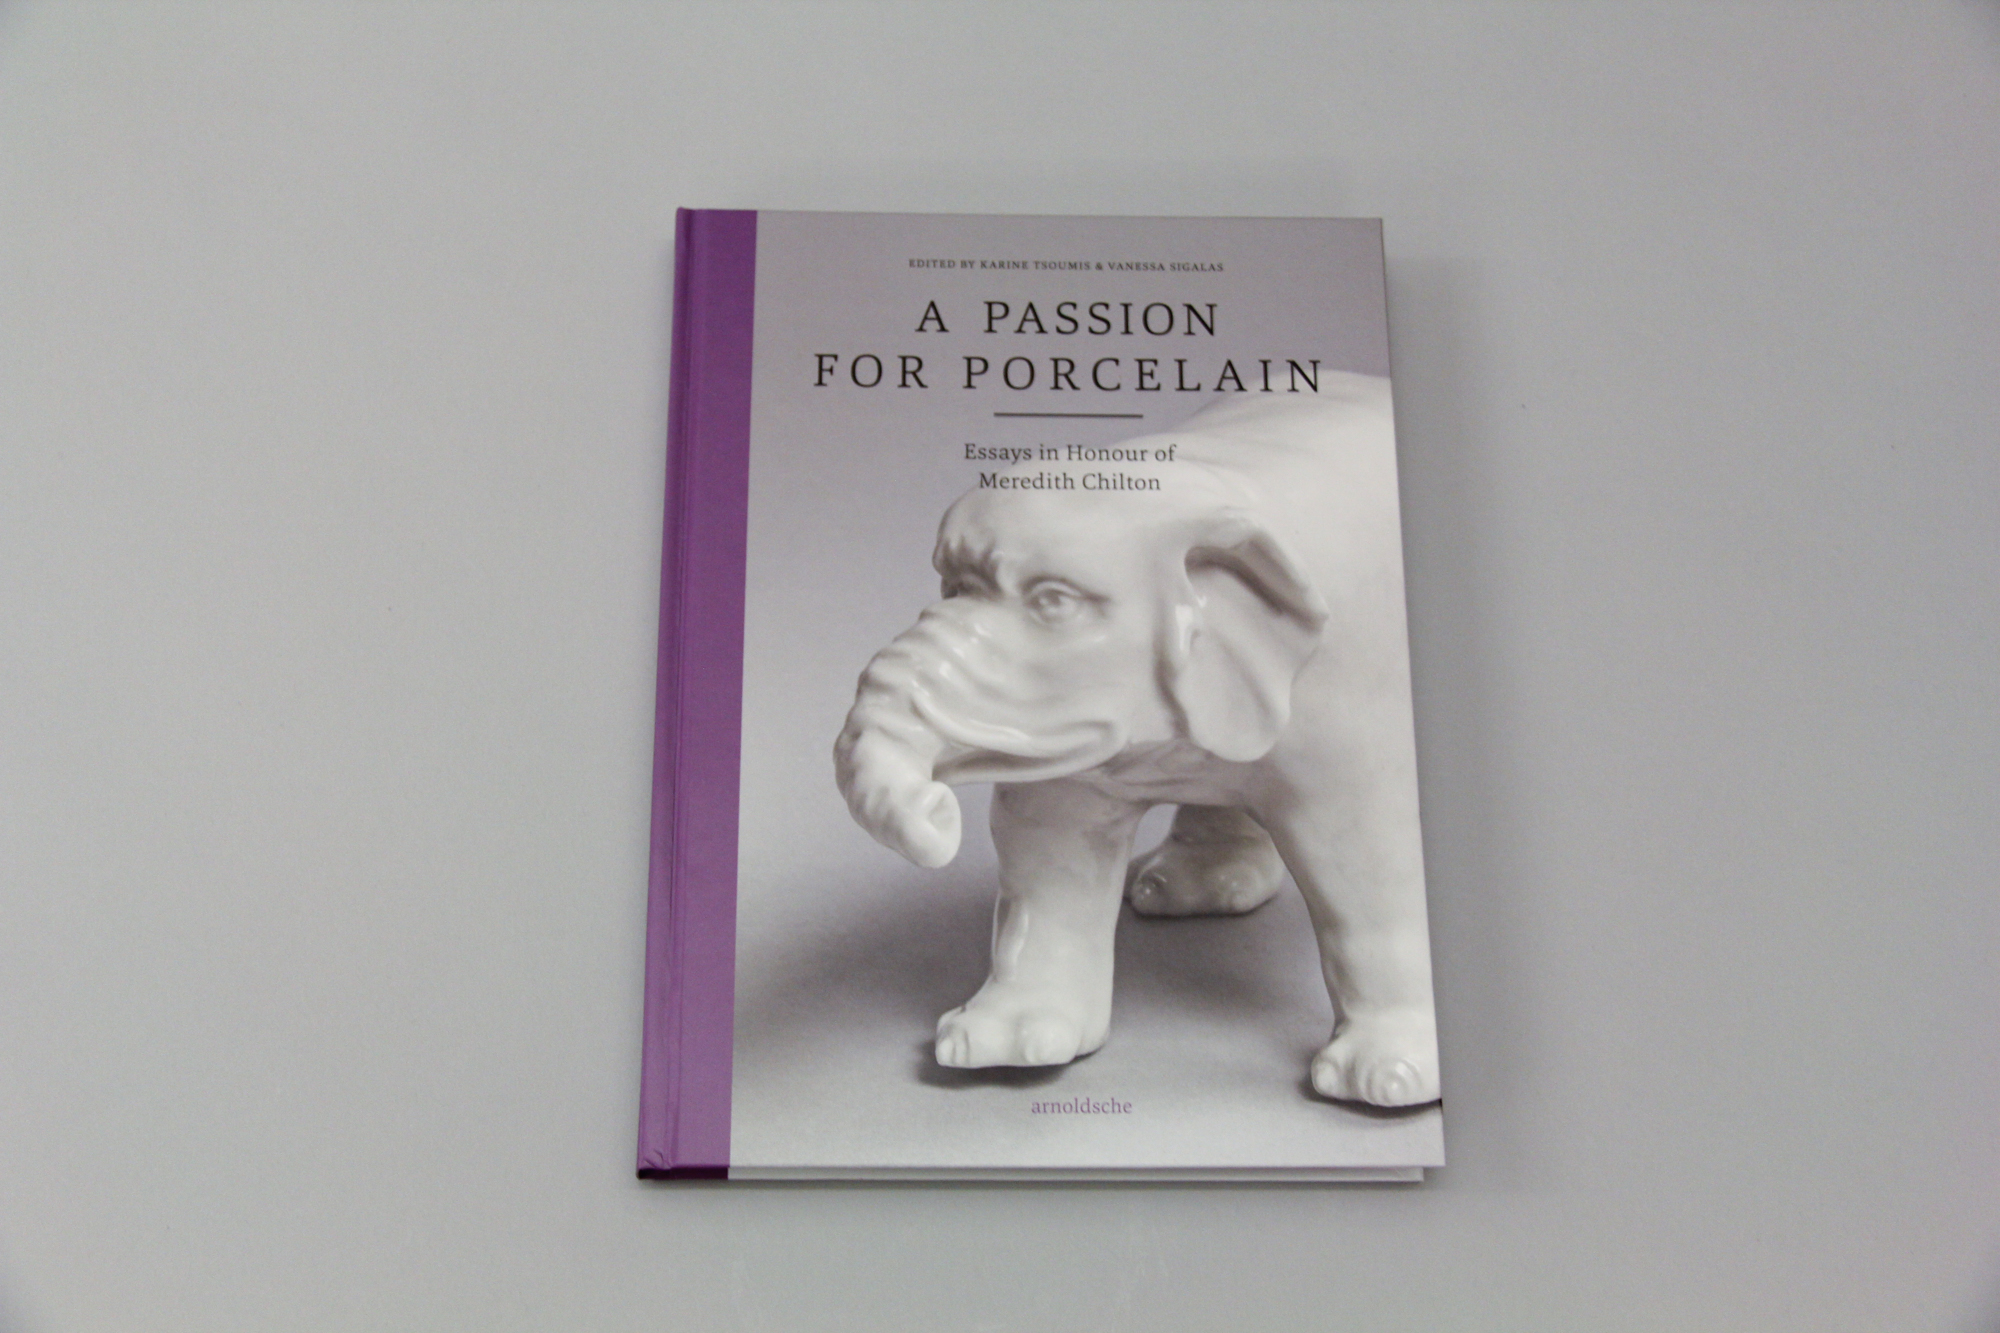 A Passion for Porcelain: Essays in Honour of Meredith Chilton Product Image 1 of 4